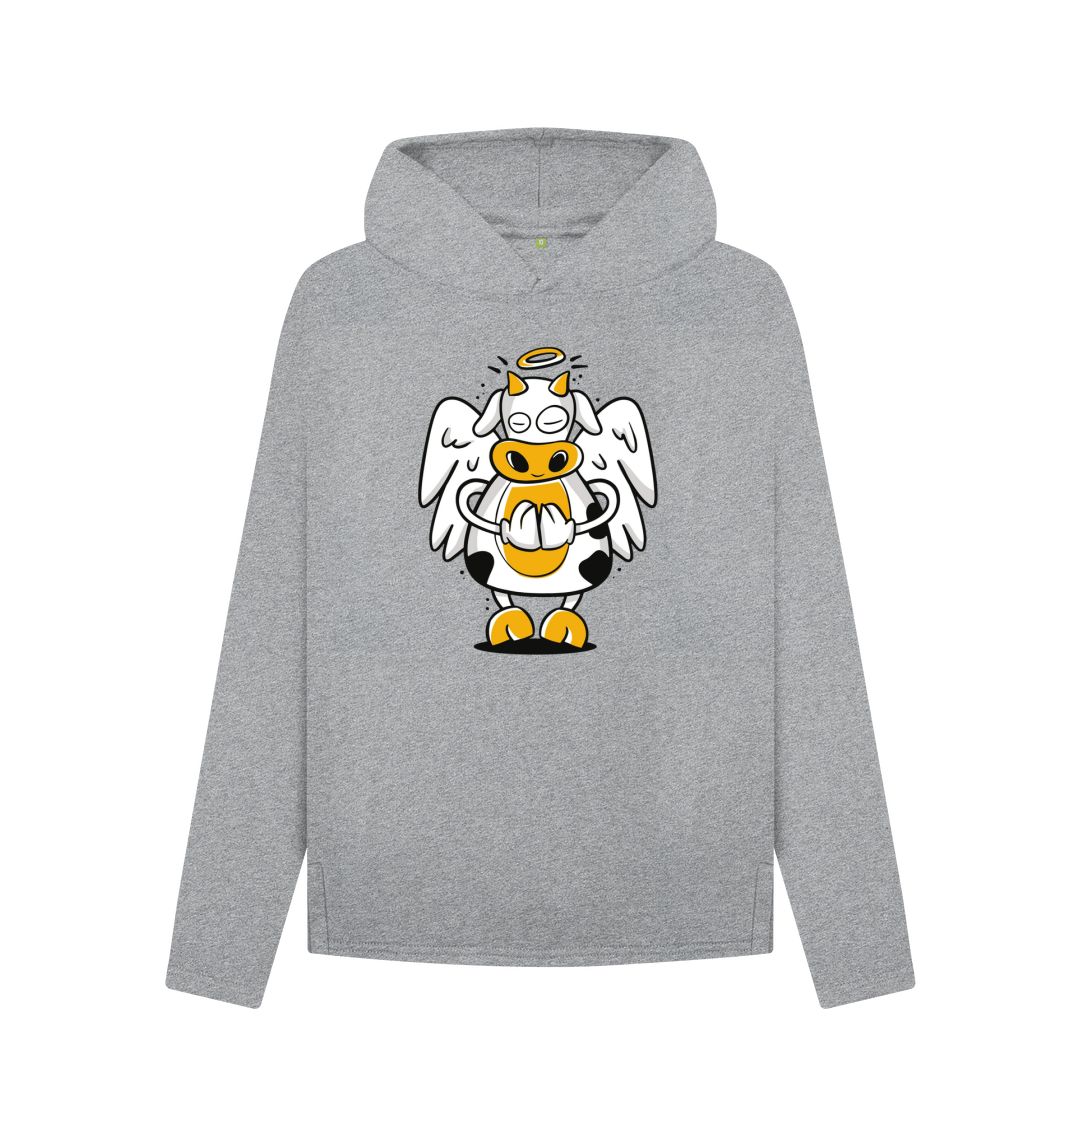 Athletic Grey Angelic Cow Women's Relaxed Fit Hoodie